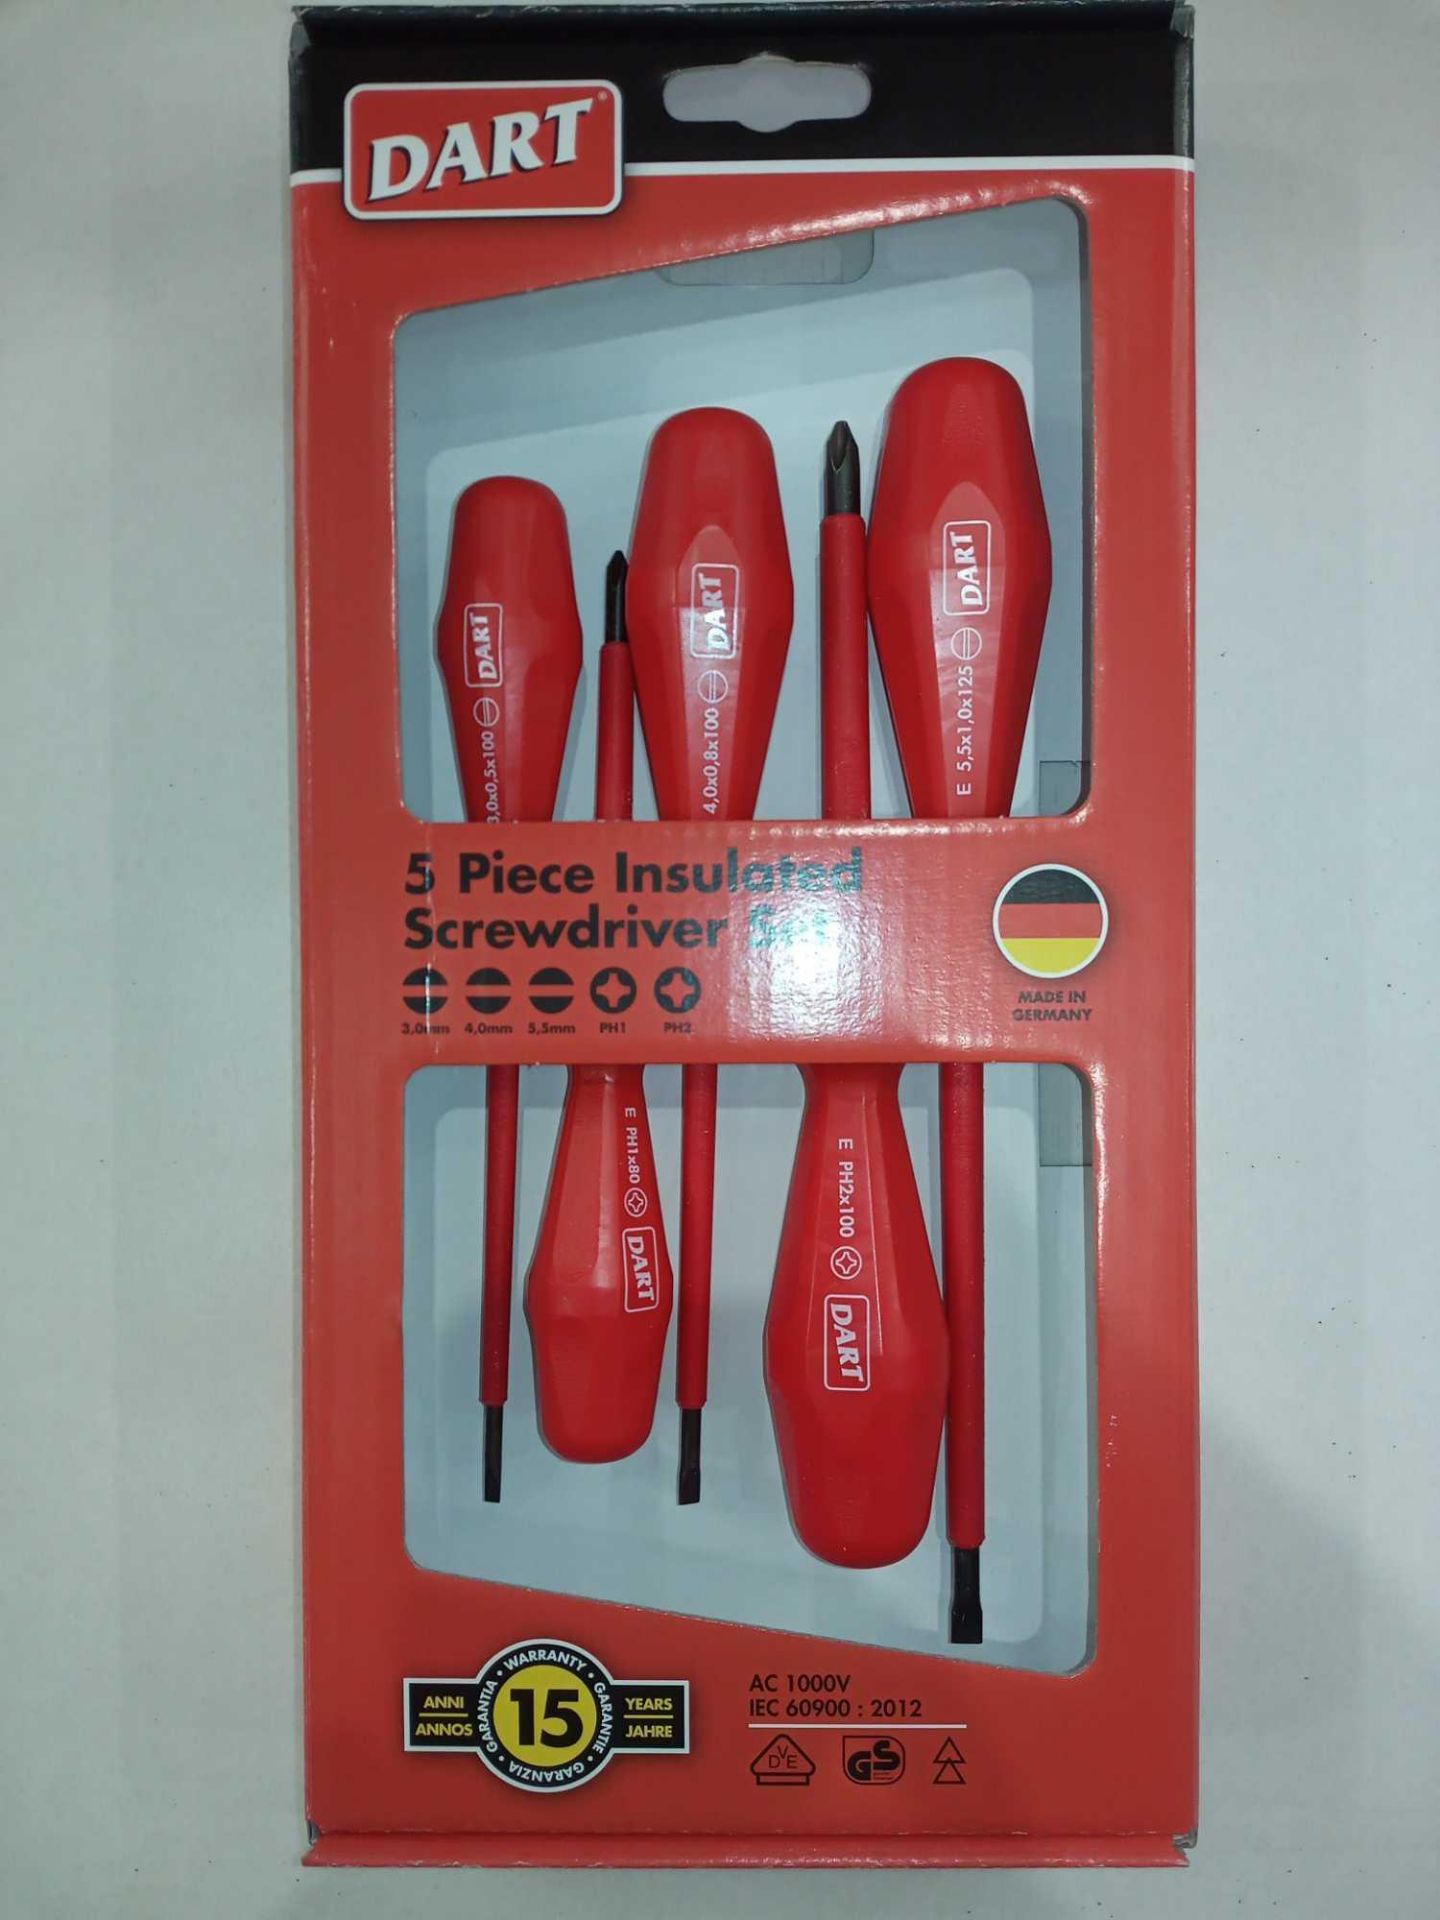 Rrp £150 Brand New 5 Piece Insulated Screwdriver Sets - Image 2 of 2